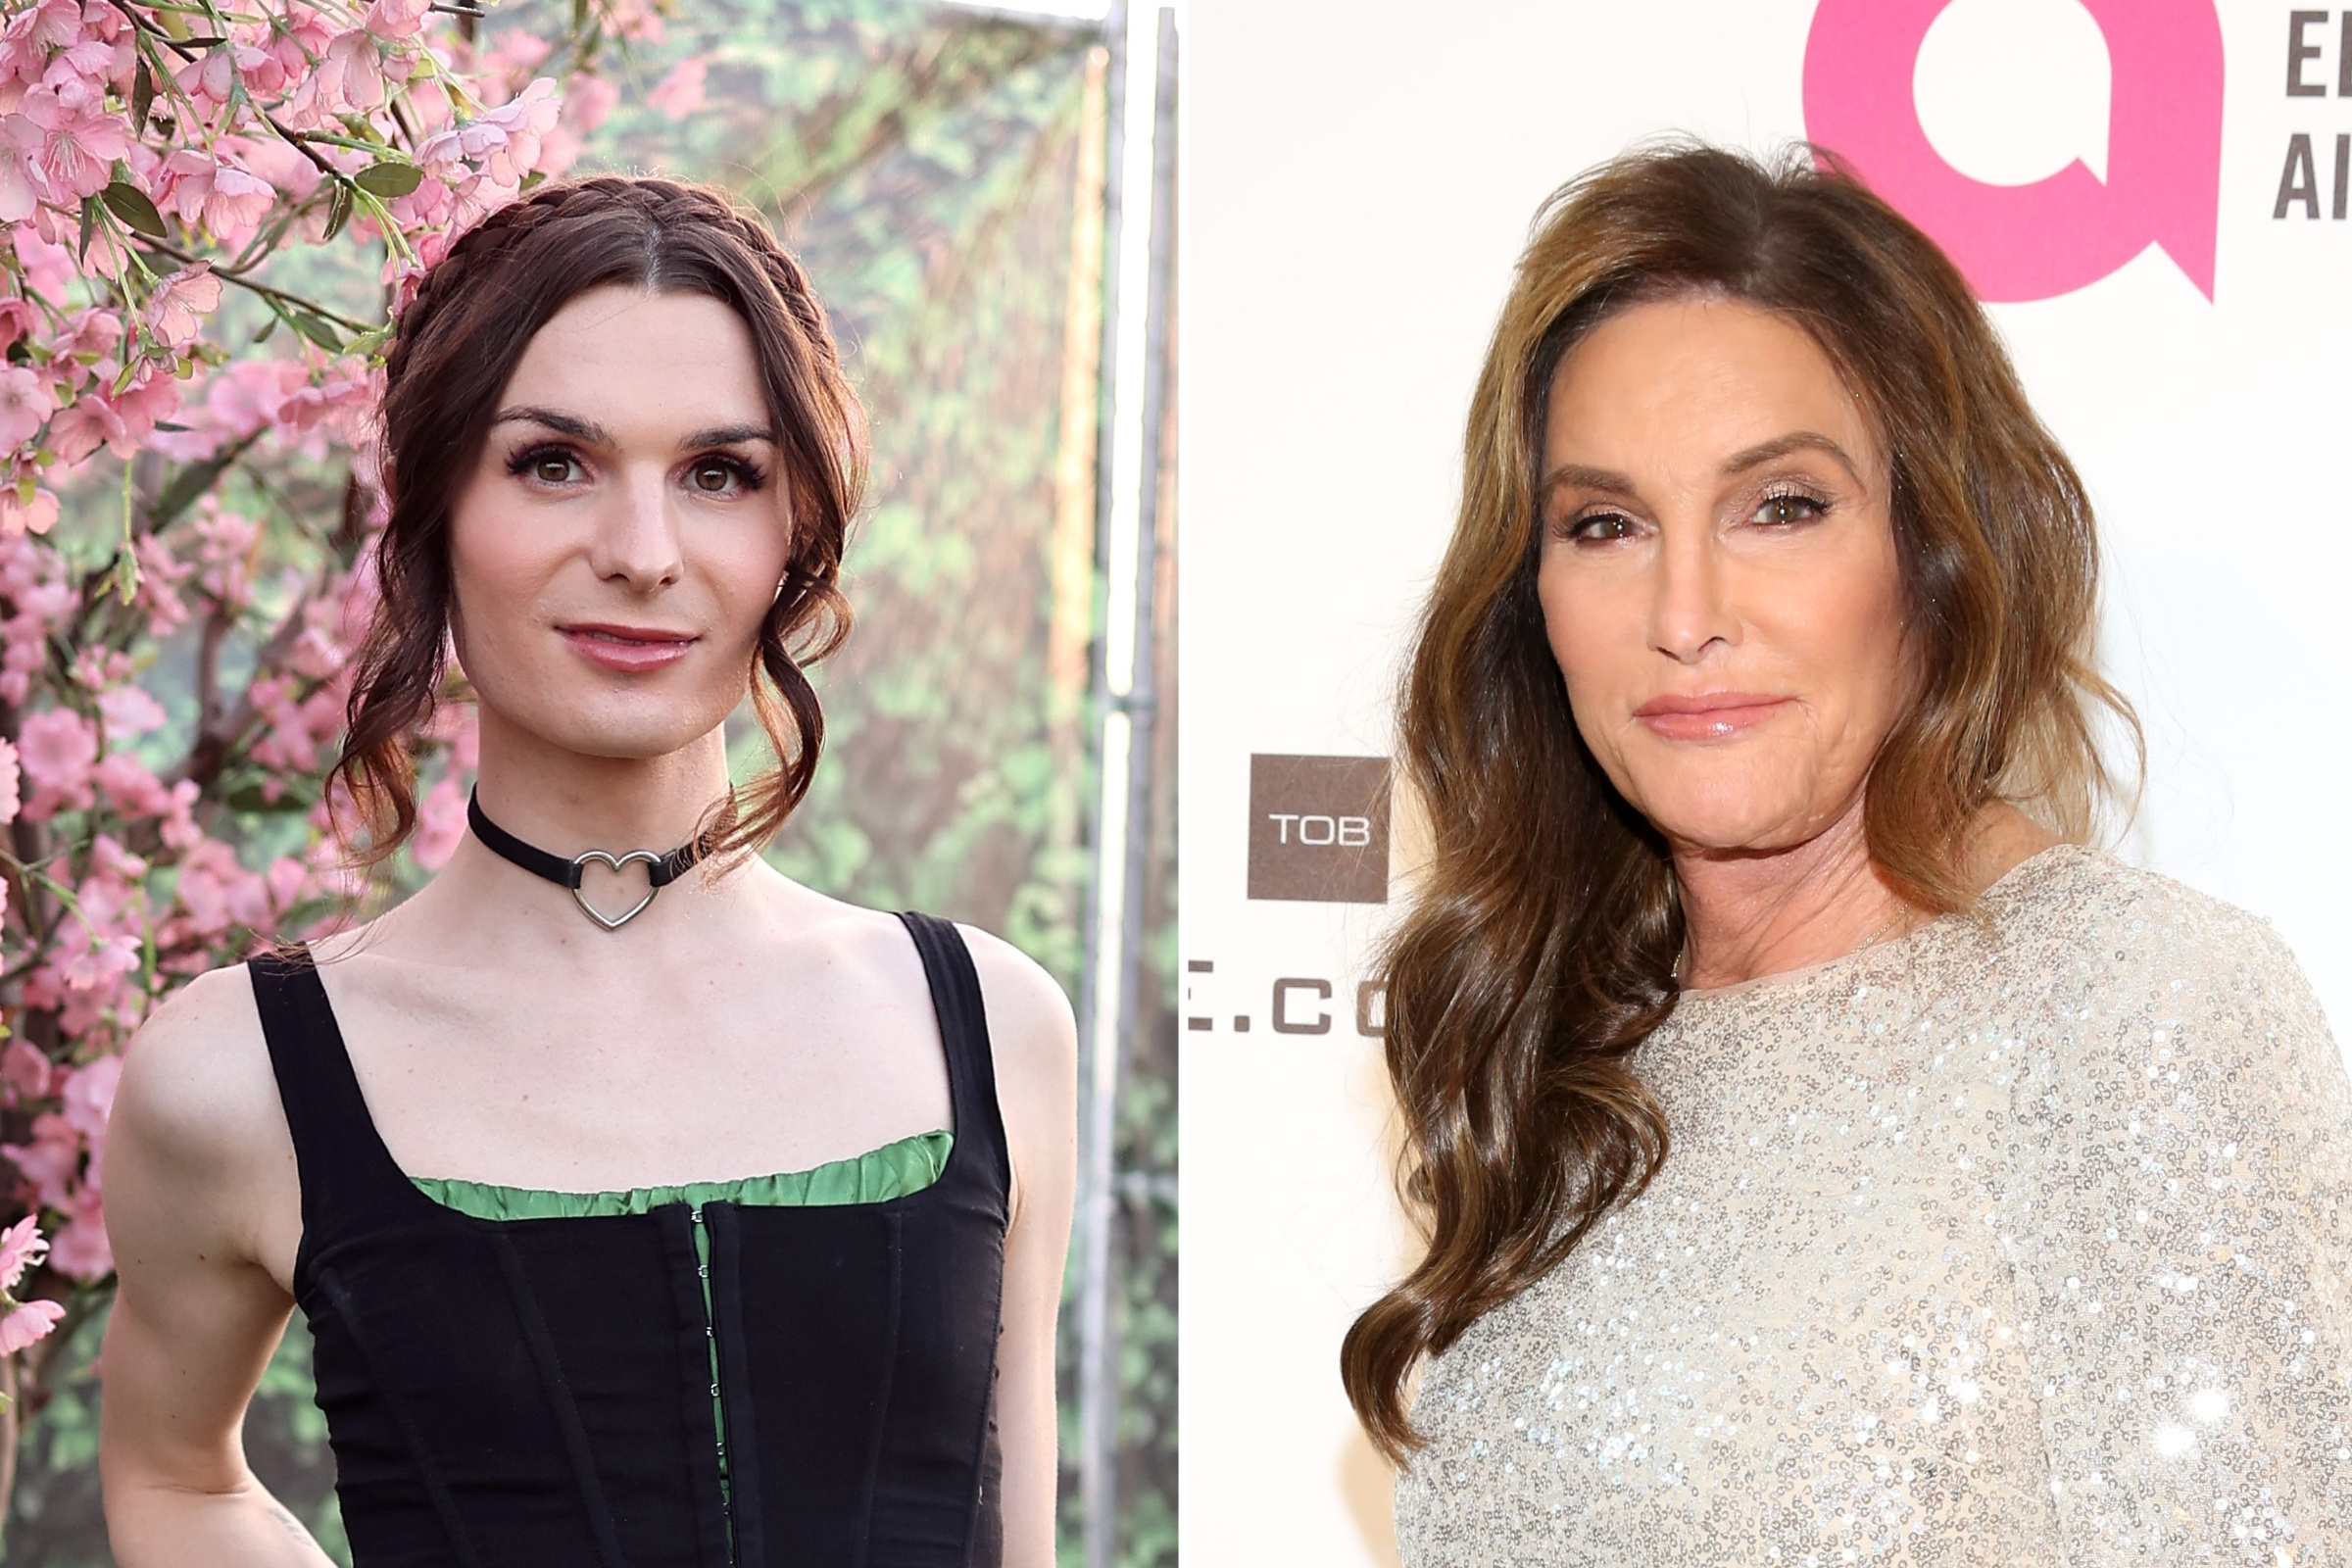 Dylan Mulvaney Calls Caitlyn Jenner Out On Hypocrisy: "Pretty Evil"